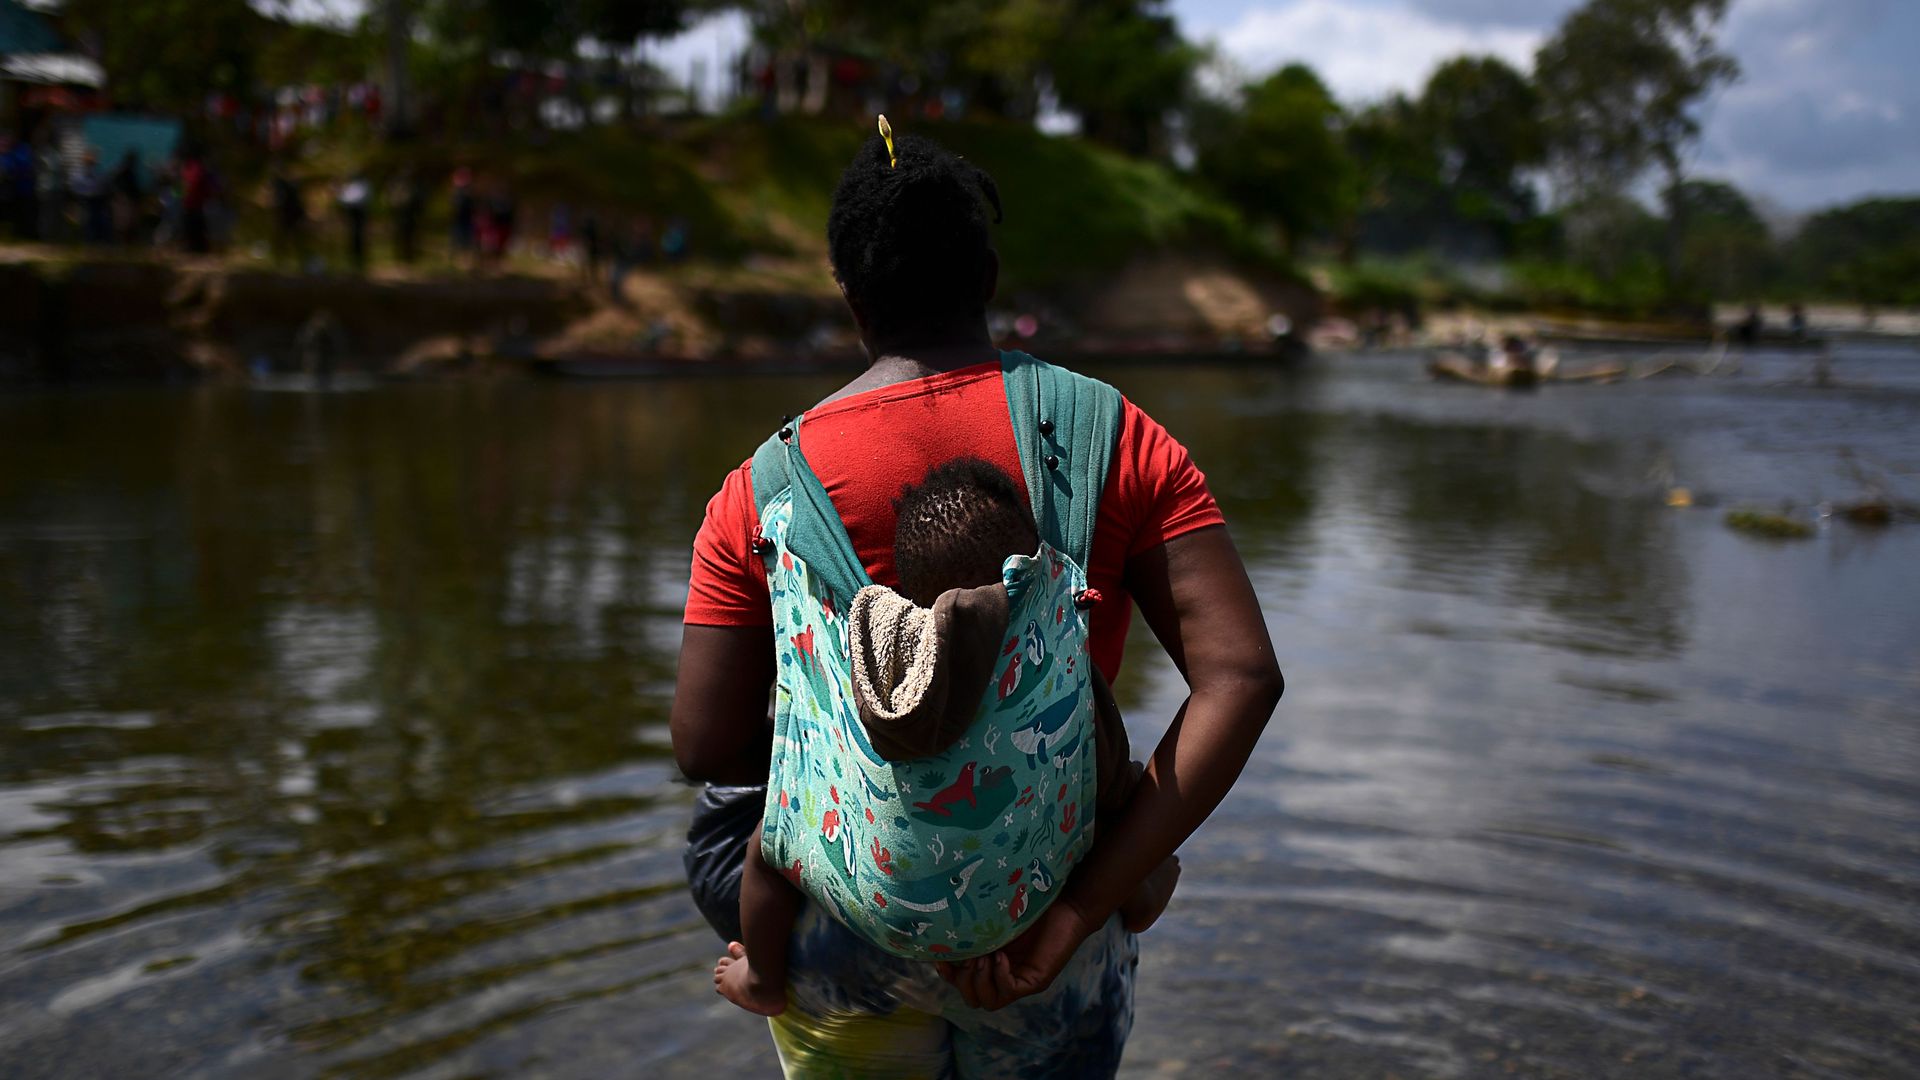 A migrant carrying a baby crosses the Chucunaque river after walking for five days in the Darien Gap, in Bajo Chiquito village, Darien province, Panama on February 10, 2021, on their way to the US.